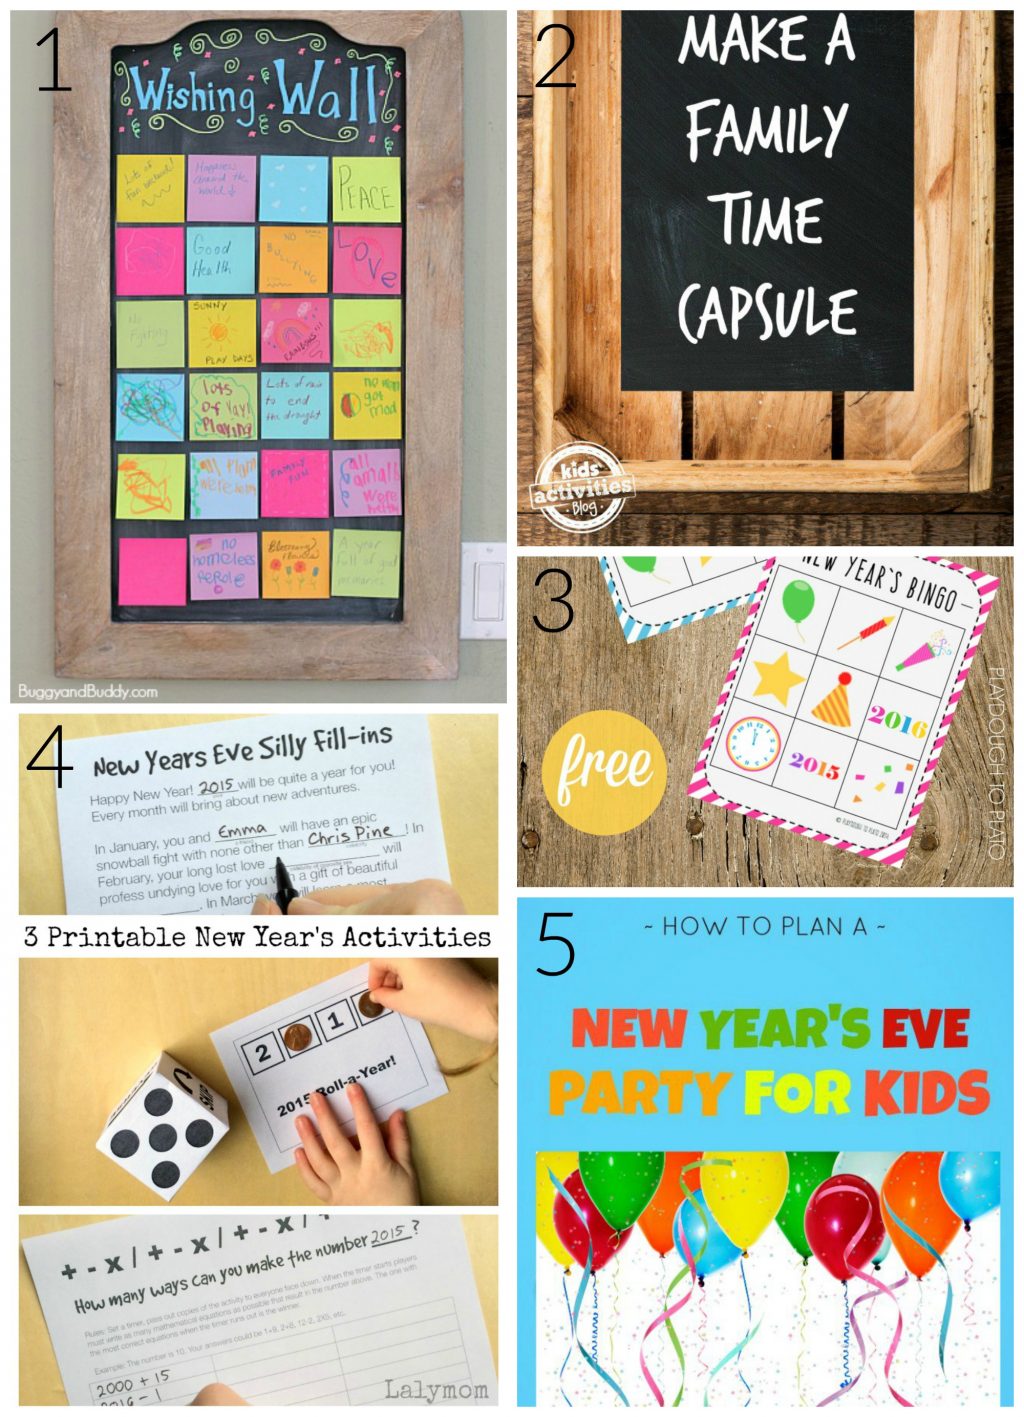 Fun Ideas to Ring in the New Year with Kids